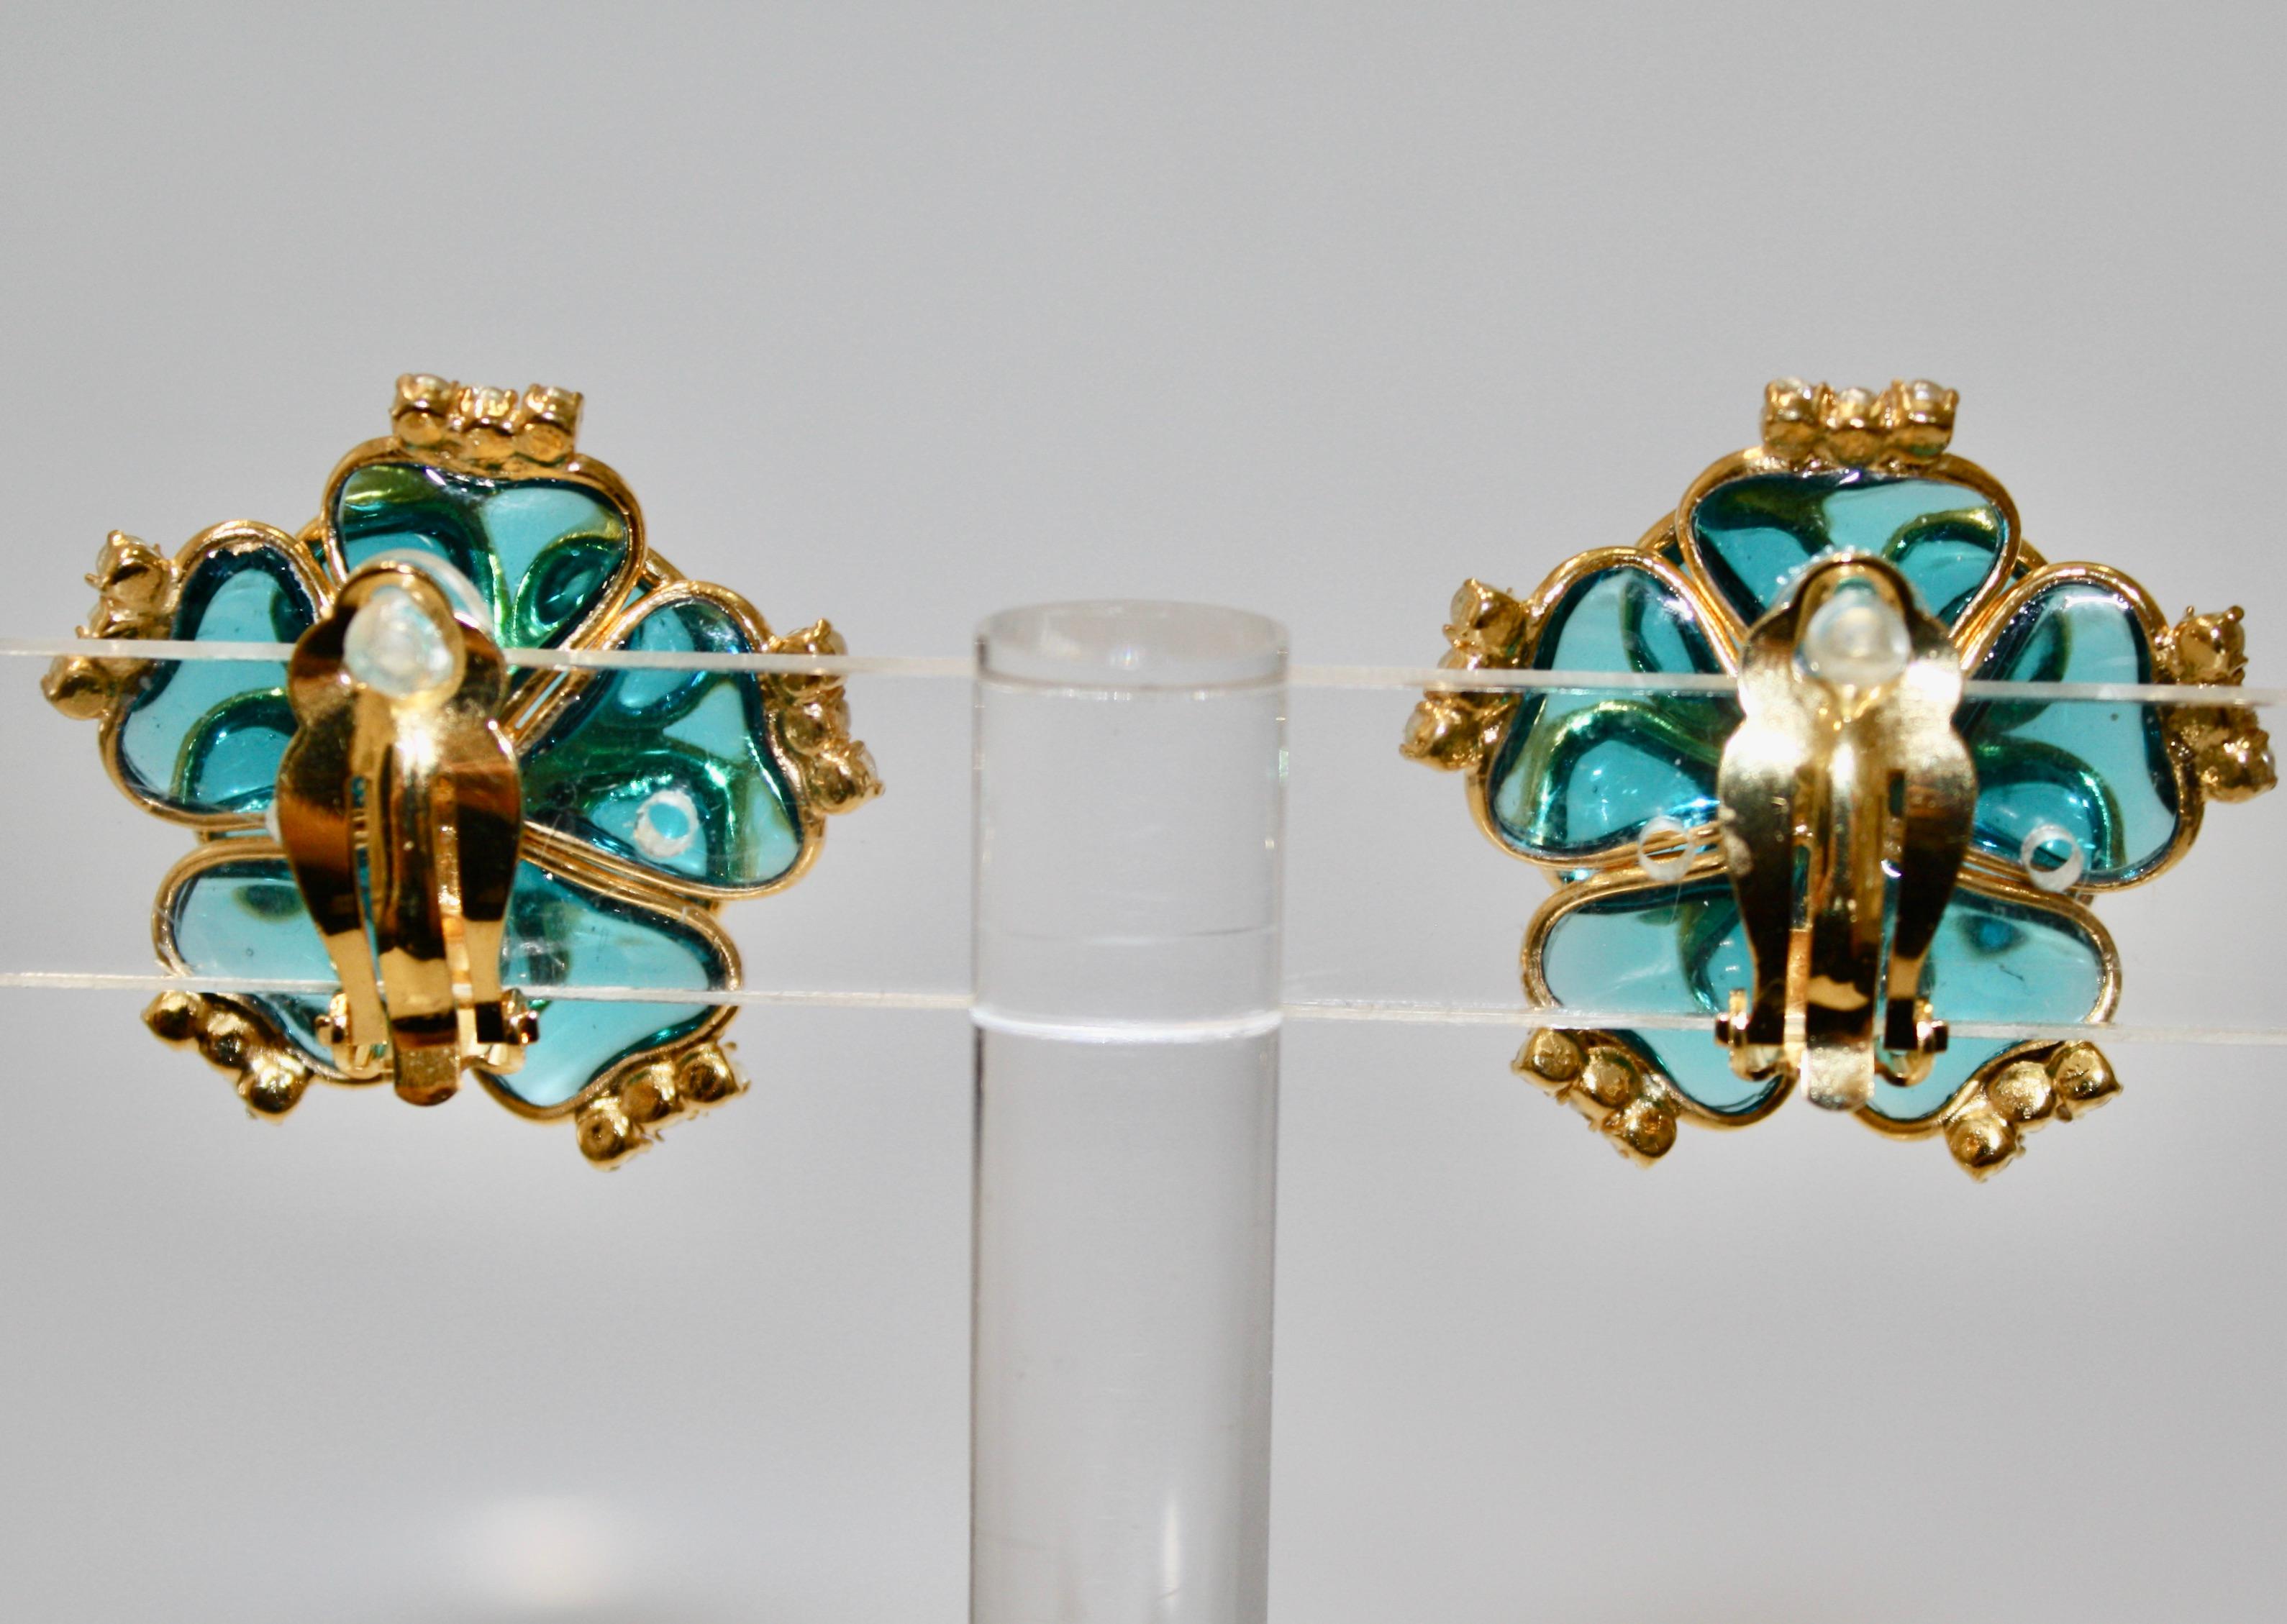 Made by the former artisans of the House of Gripoix. Handmade glass pearls and aqua tinted poured glass. A process used for the house of Chanel. Gilded brass metal.